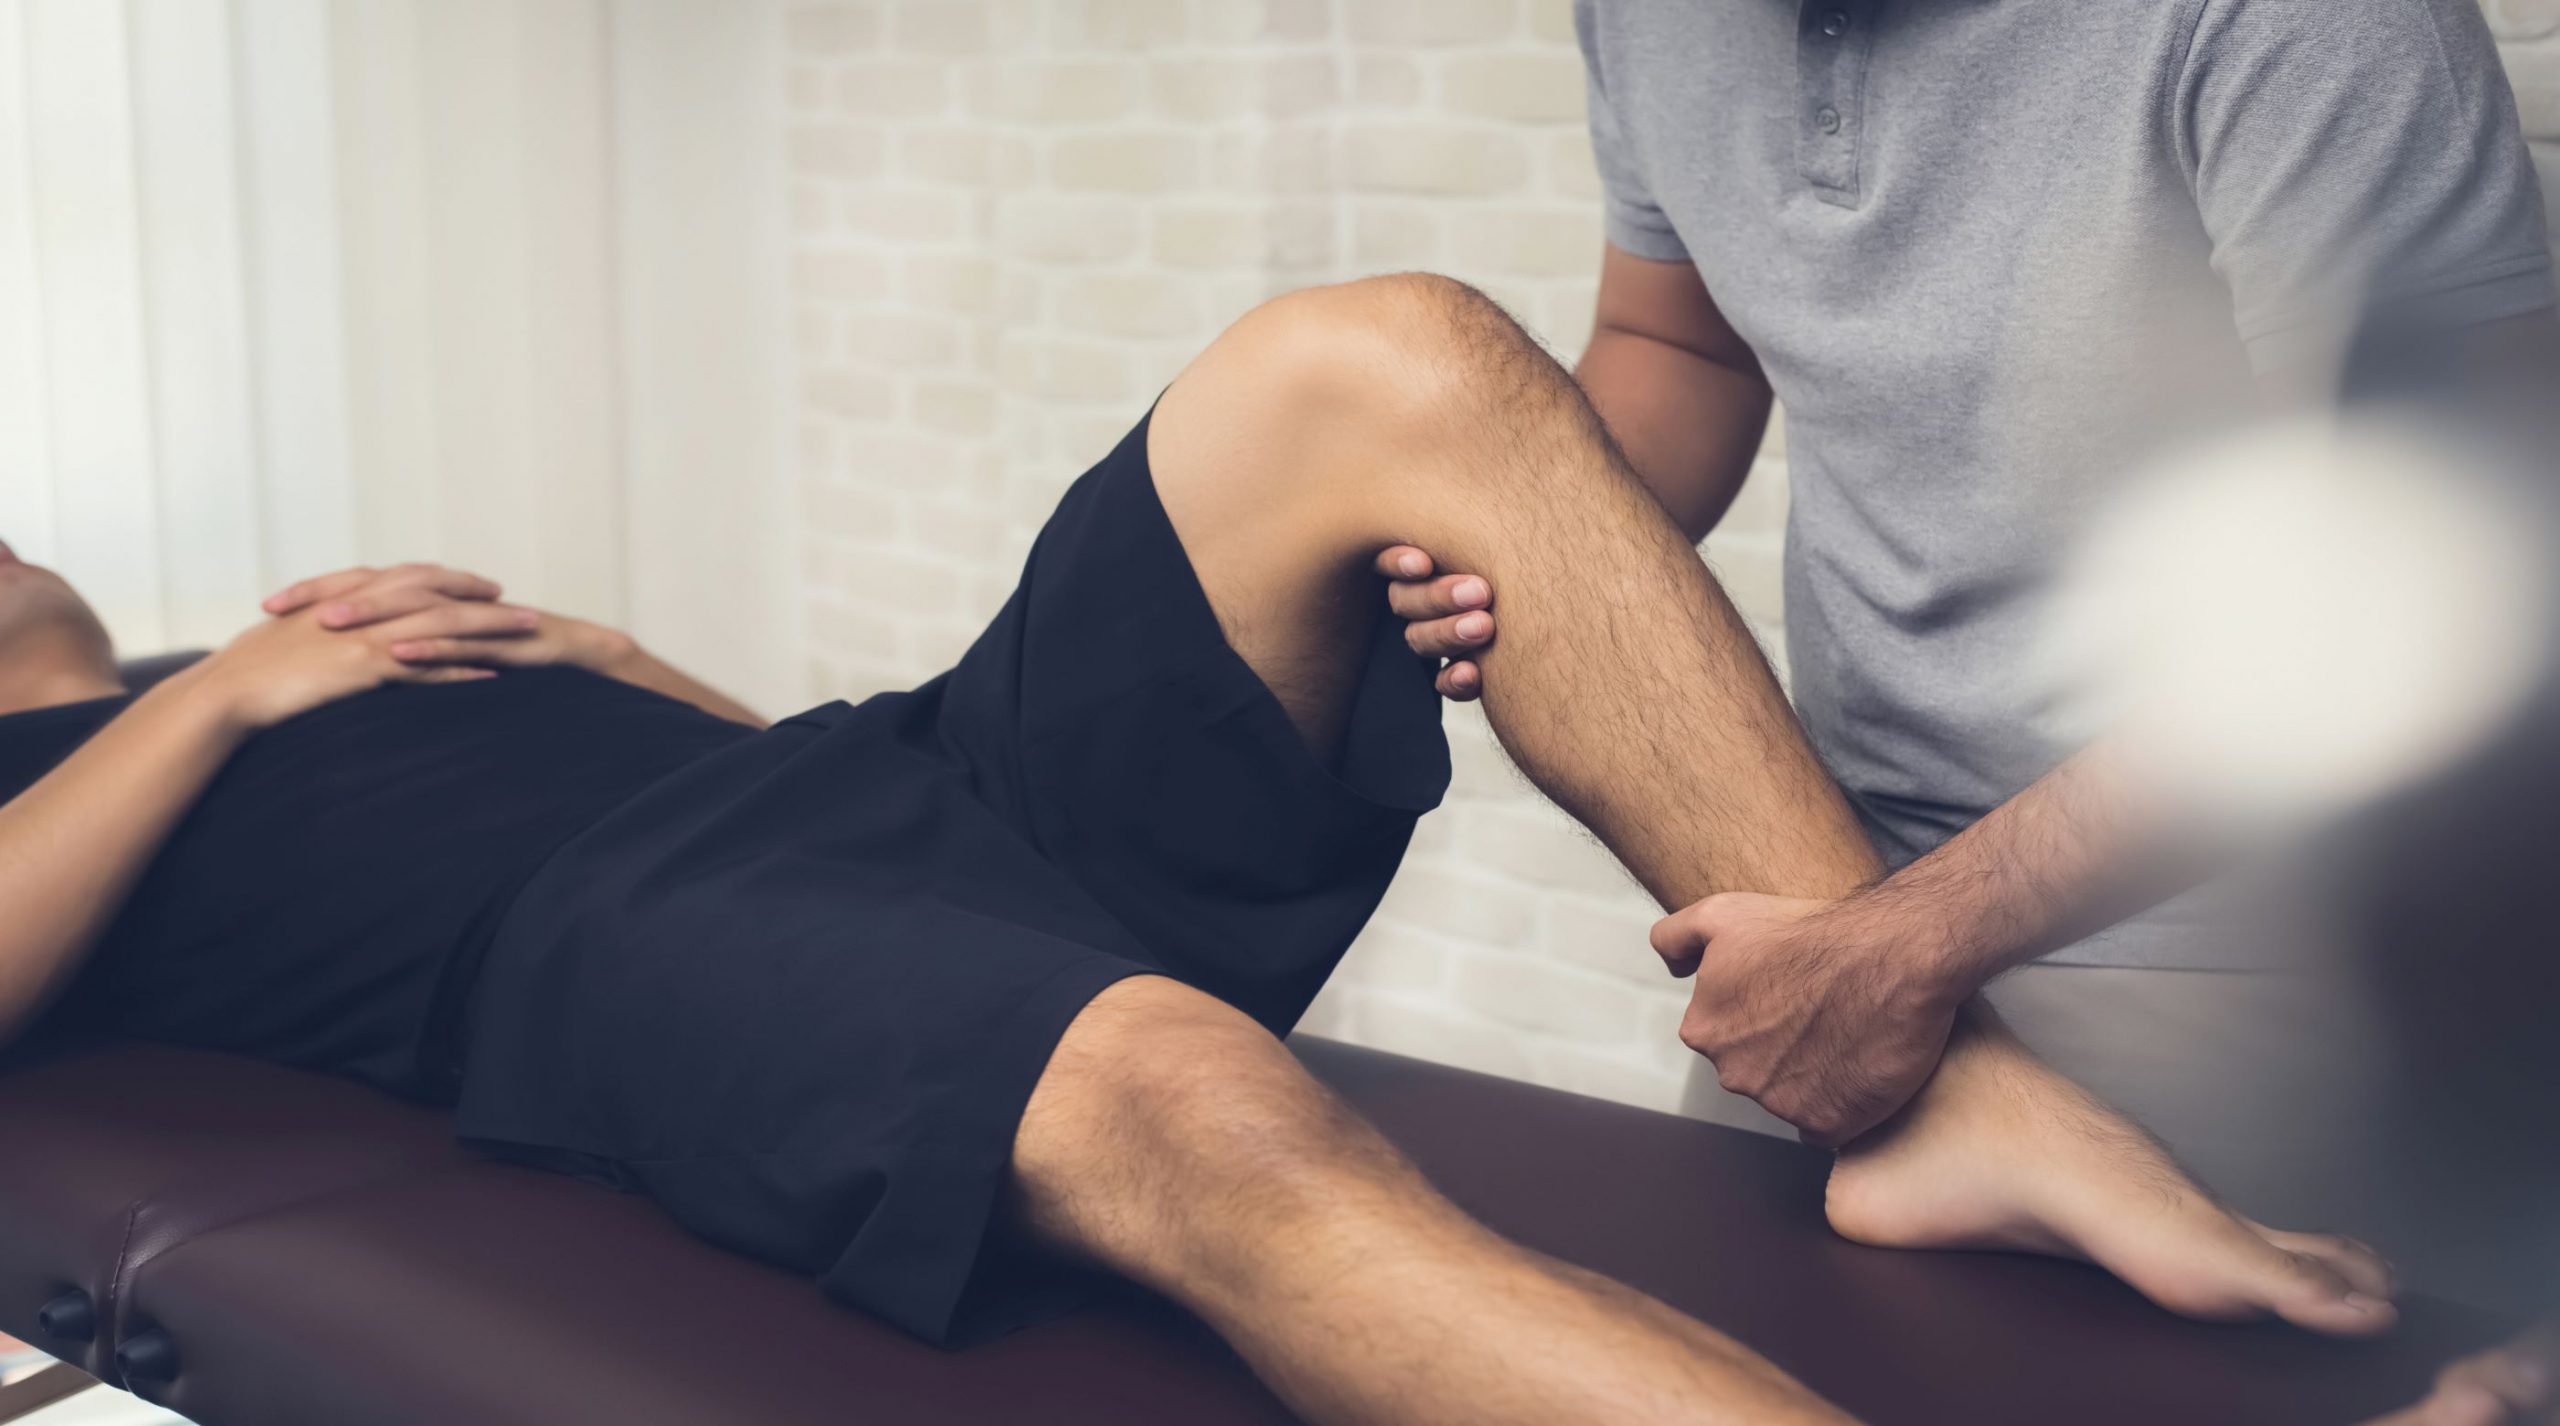 Fascial and Fluid Pumping to Improve Joint Biomechanics